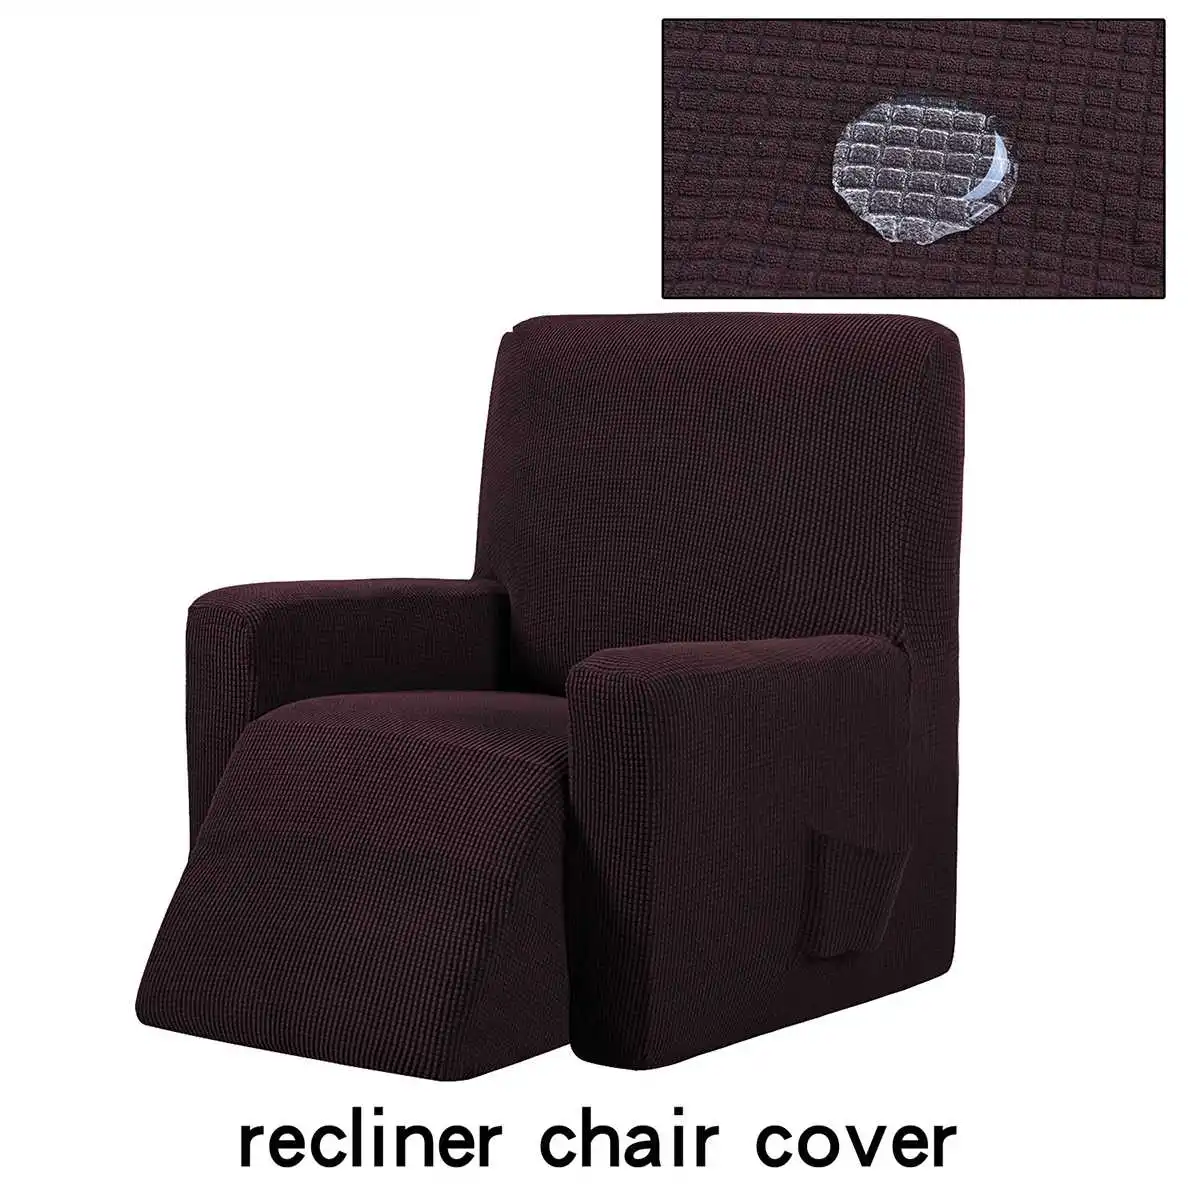 Recliner Couch Cover All-inclusive Sofa Cover Elasticity Stretch Anti-slip Furniture Slipcovers Chair Protector Single Seat Sofa - Цвет: Deep coffee